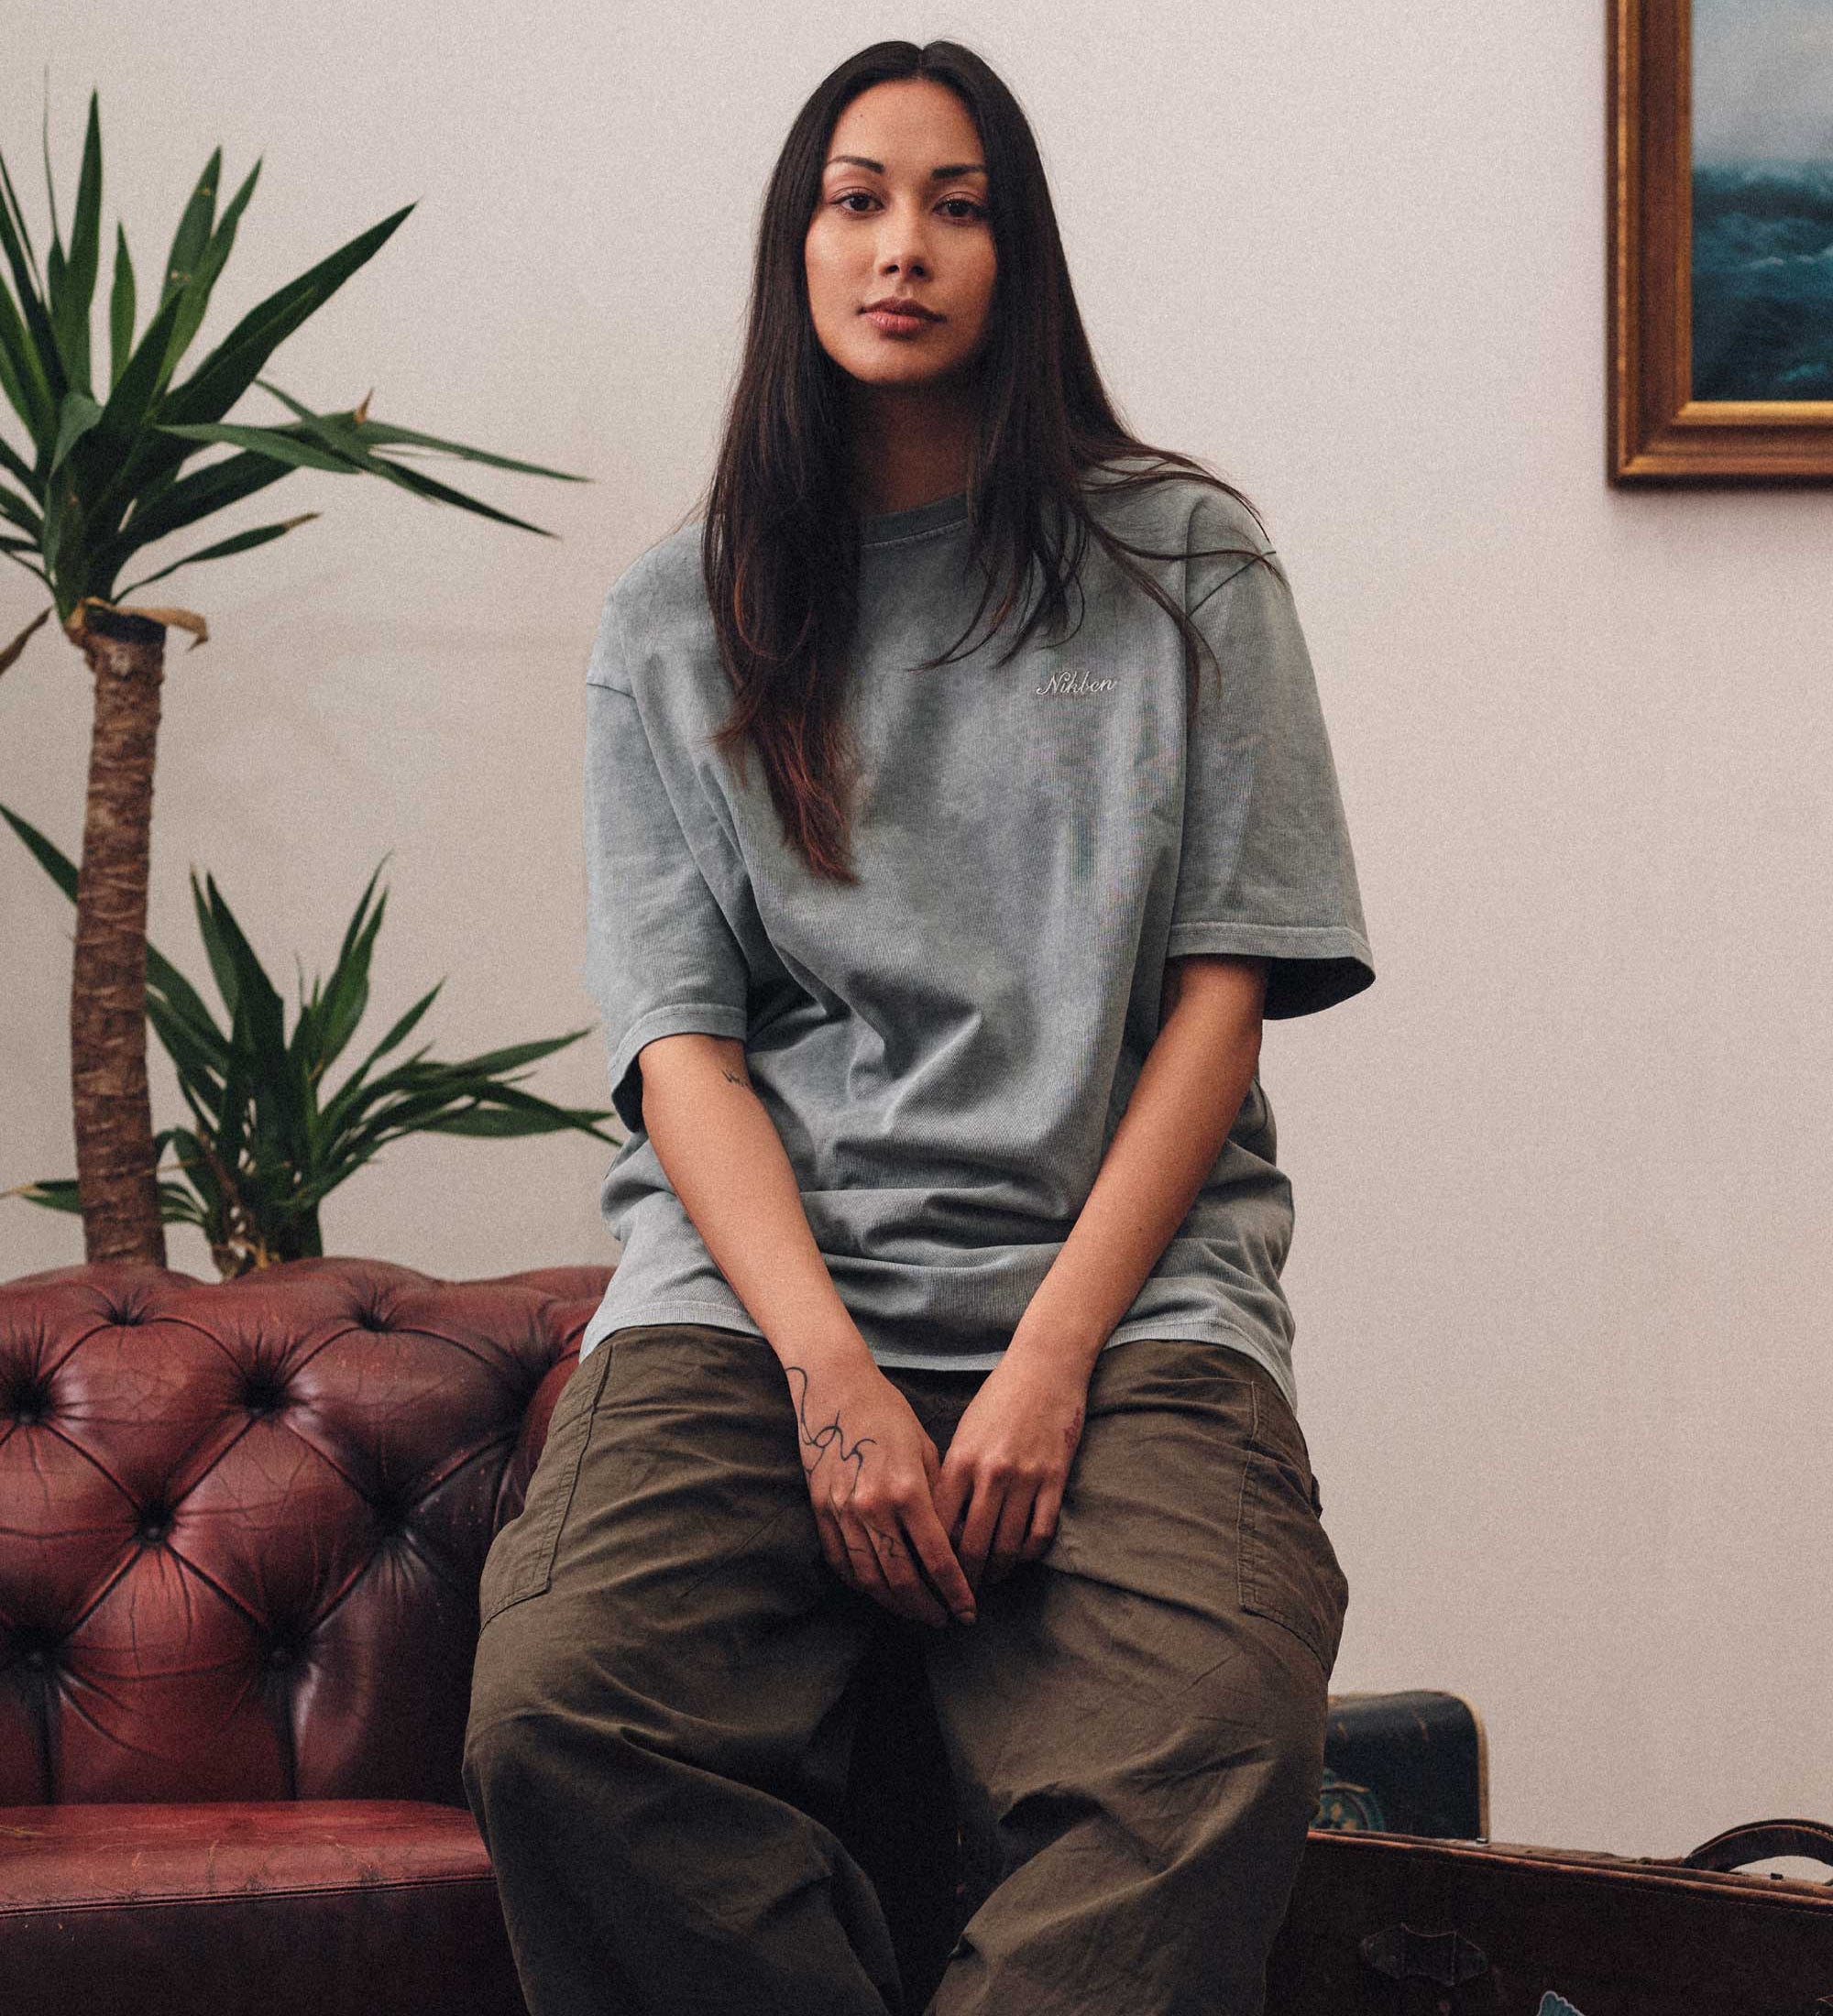 Female model wearing grey t-shirt and brown pants.